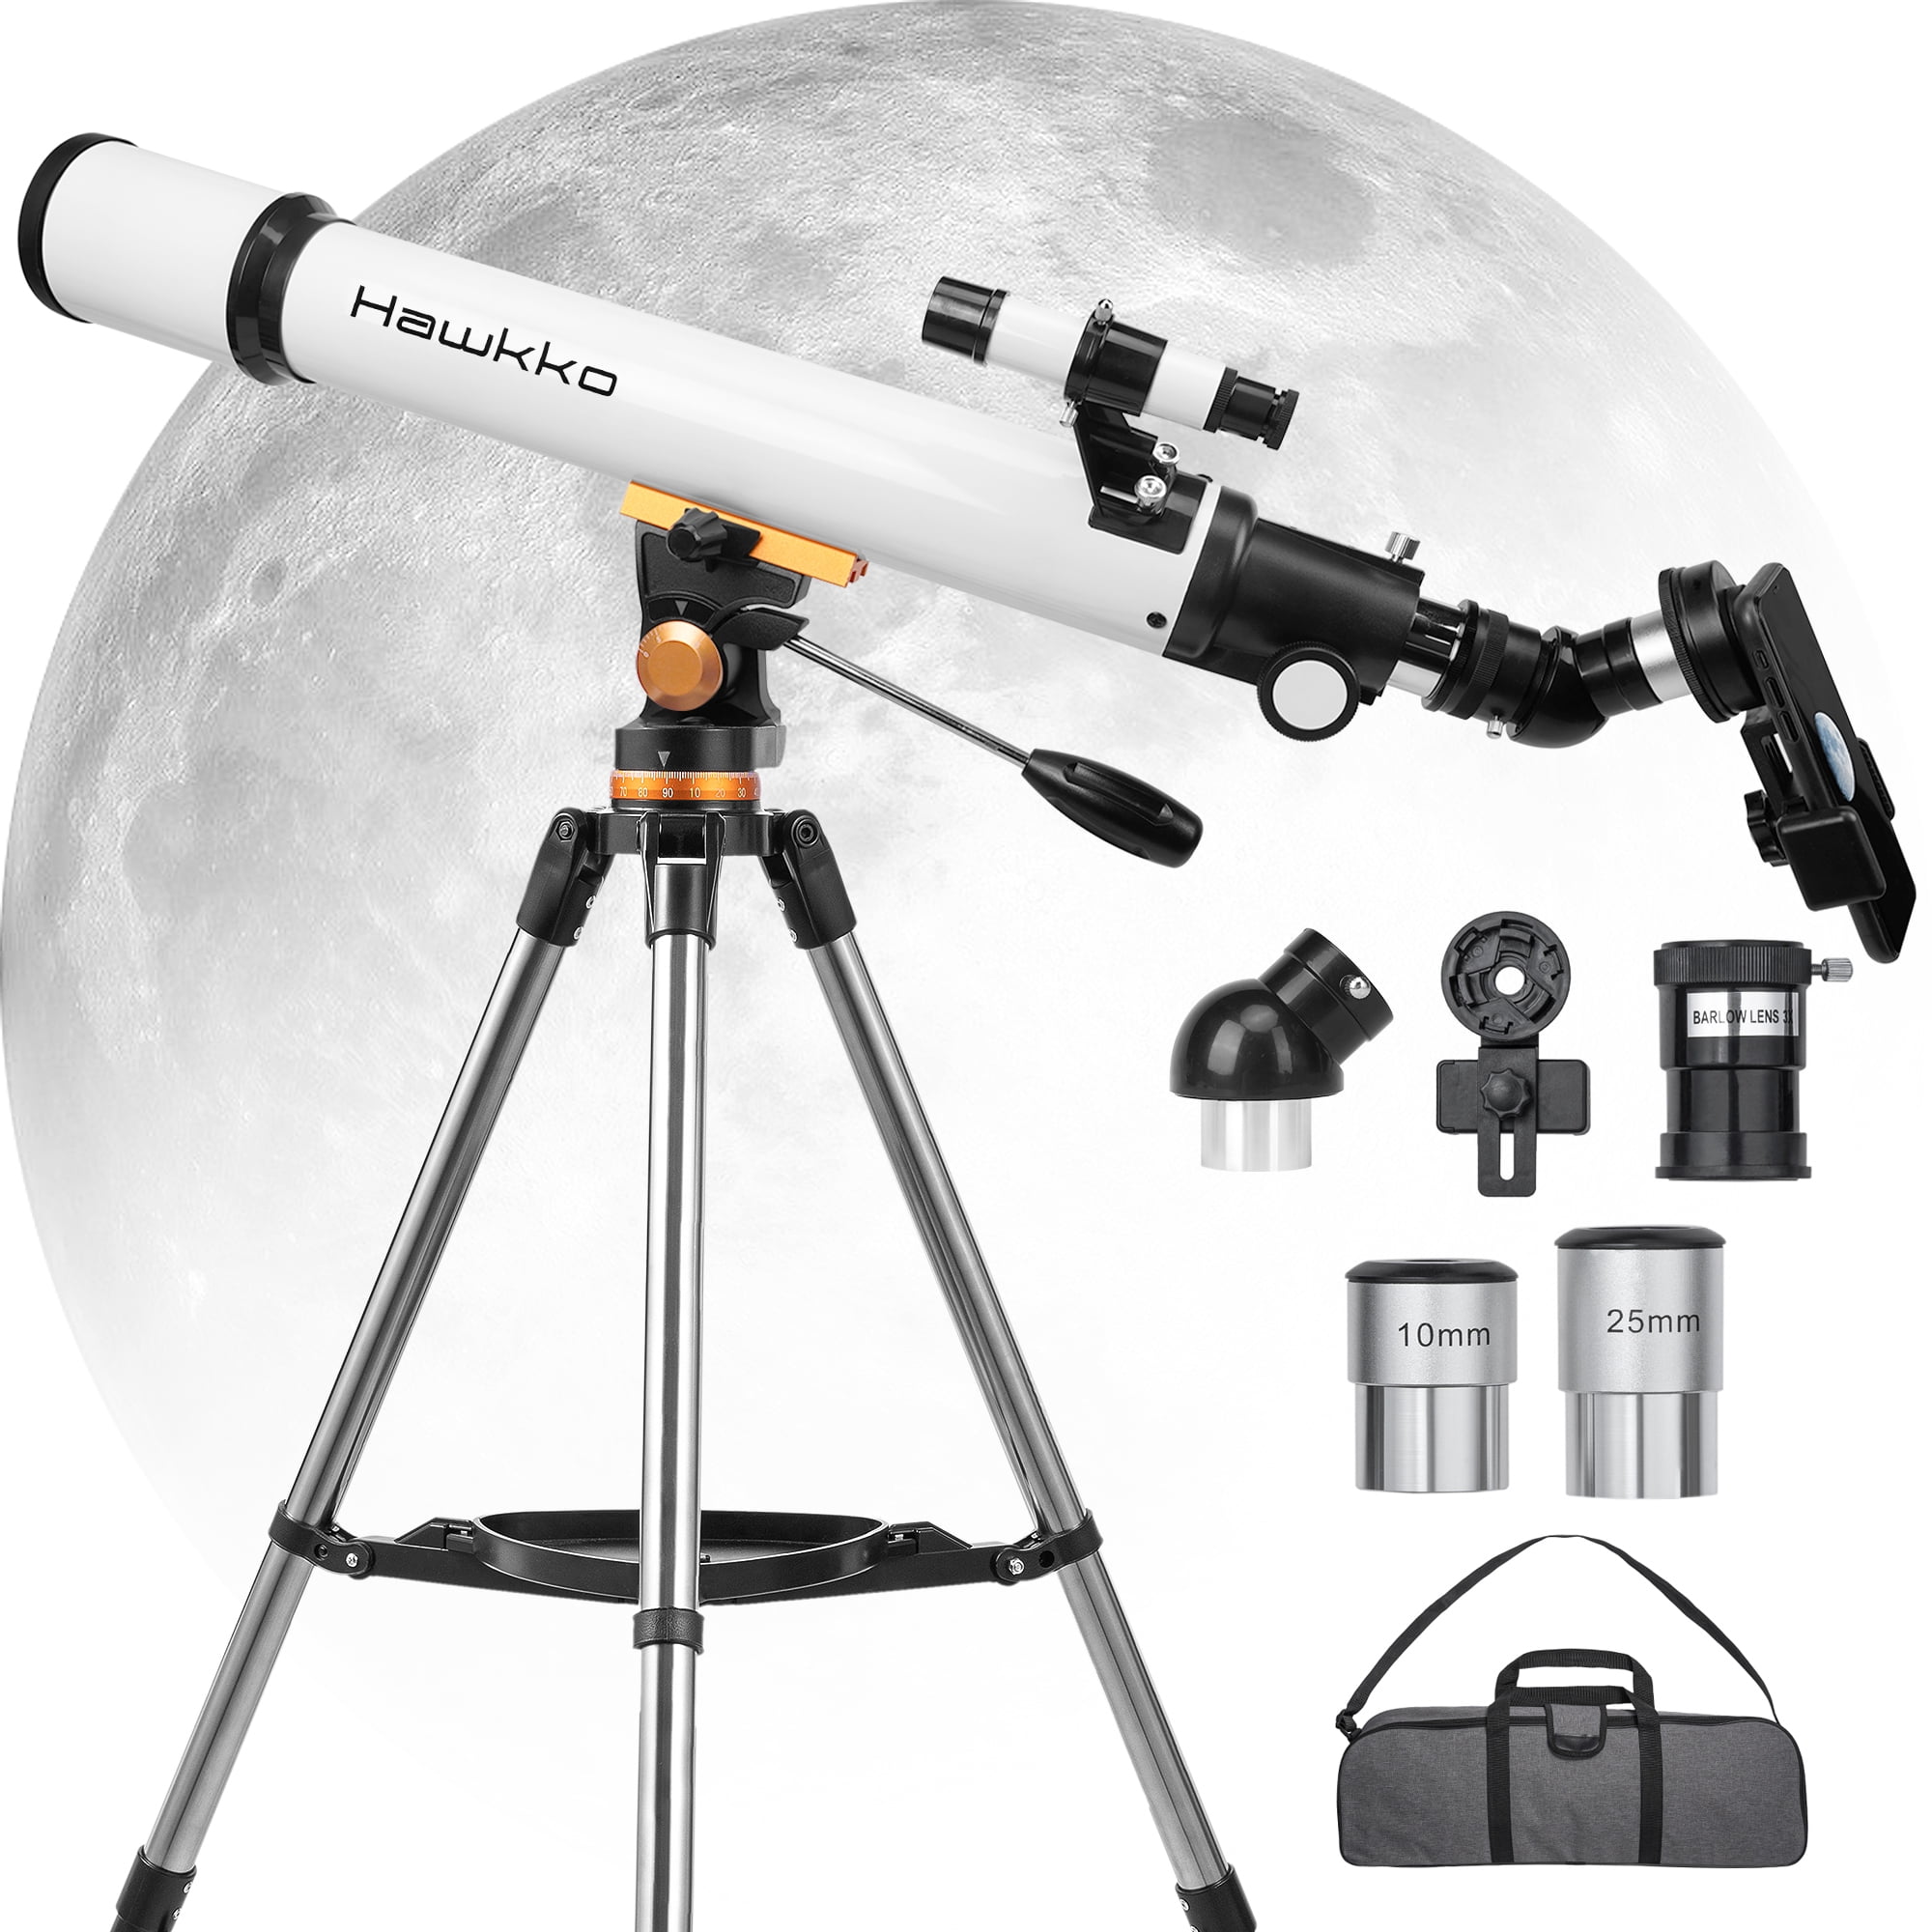 70x400mm Telescope for Kids and Beginners White 70mm Apeture Travel Scope 400mm AZ Mount with Backpack and Smartphone Mount Good Partner to View Moon and Planet 